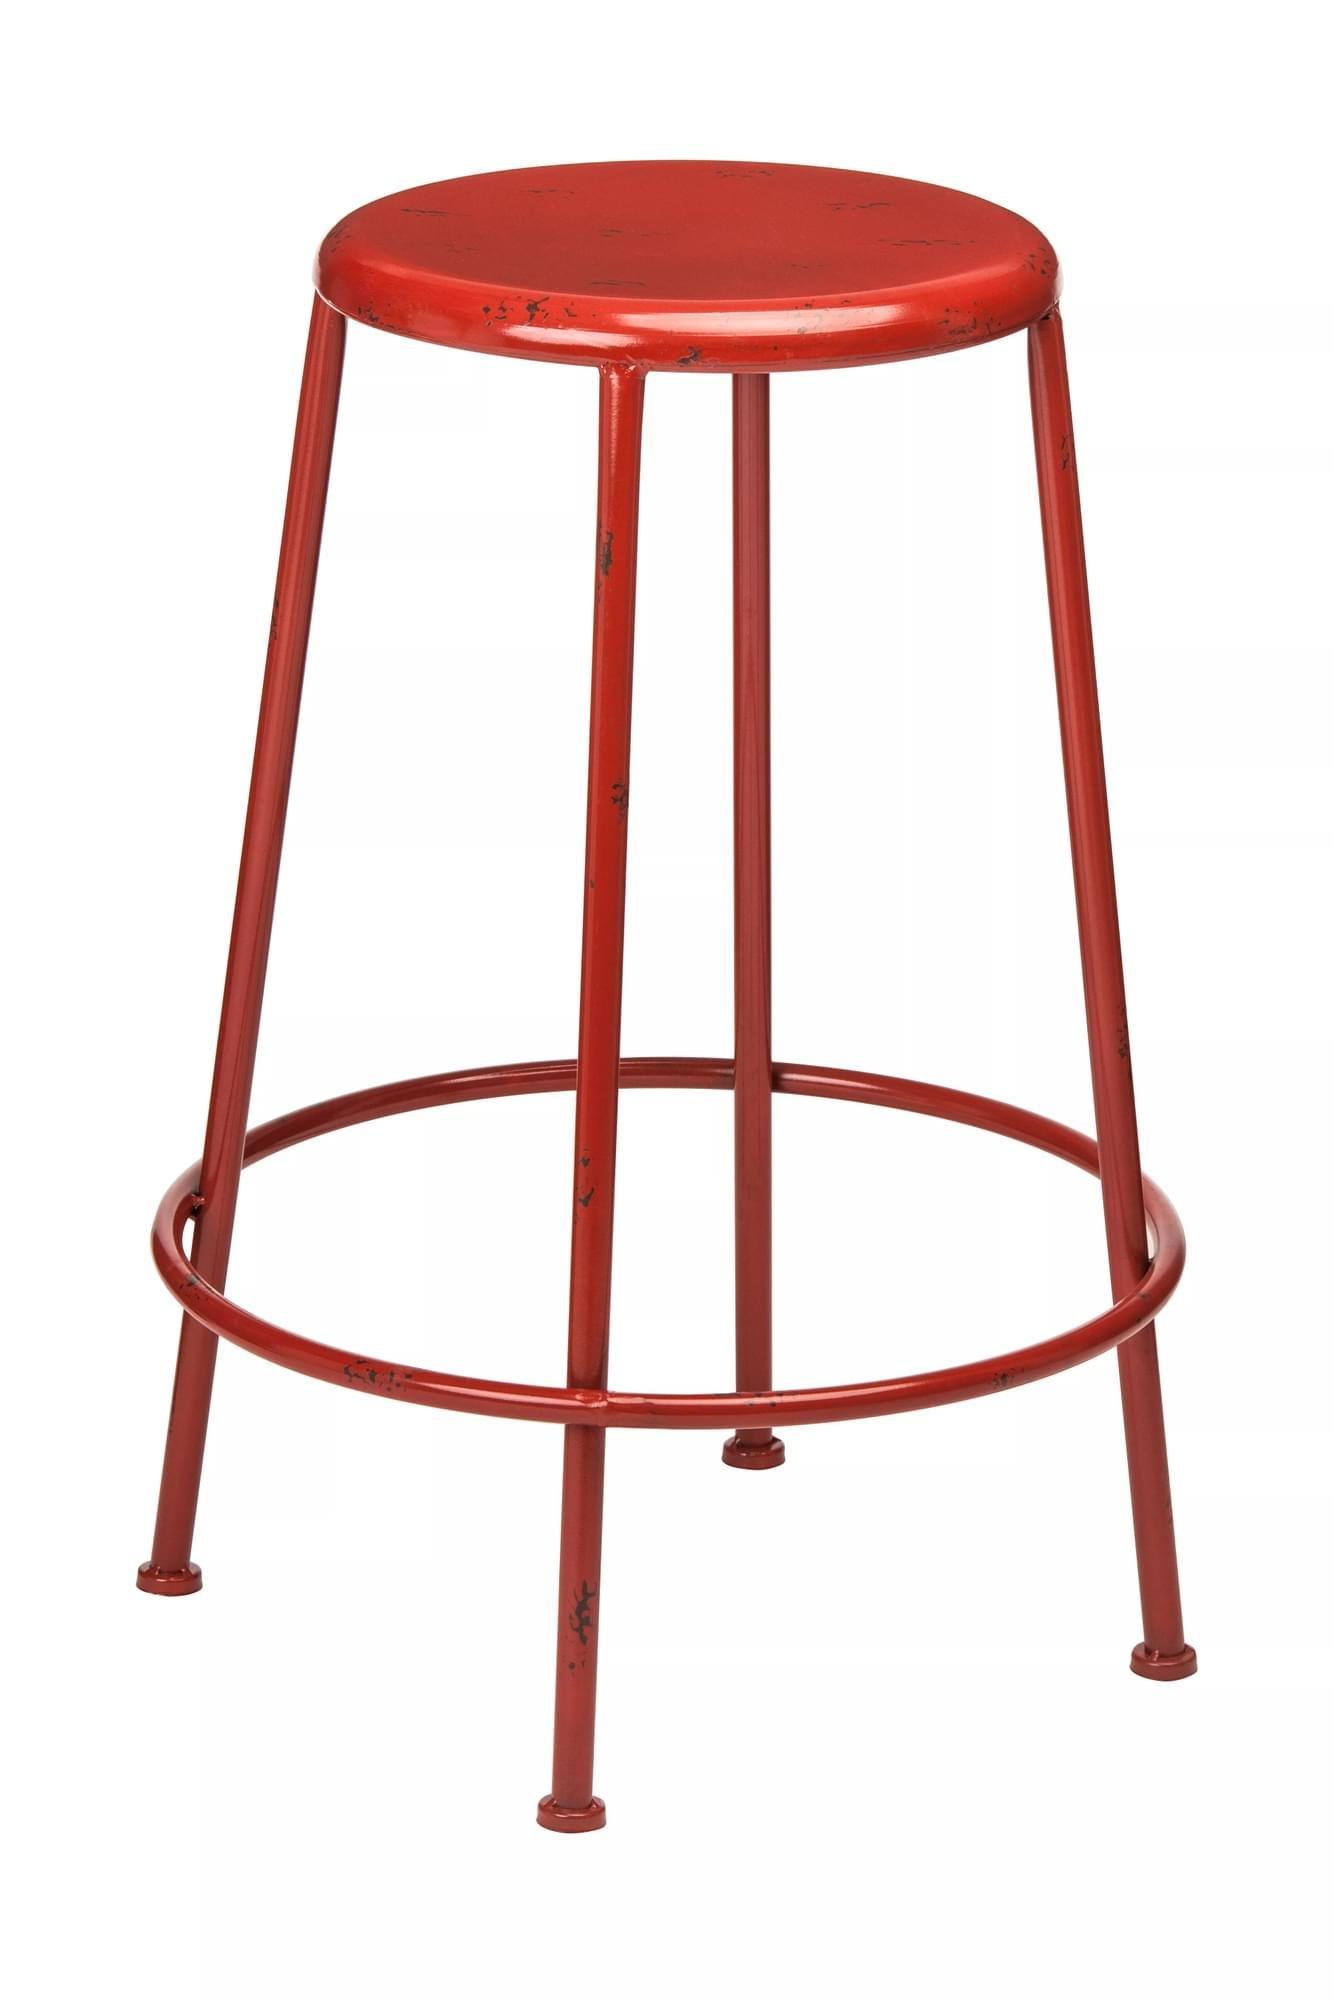 So'home Metal Stool With Distressed Effect